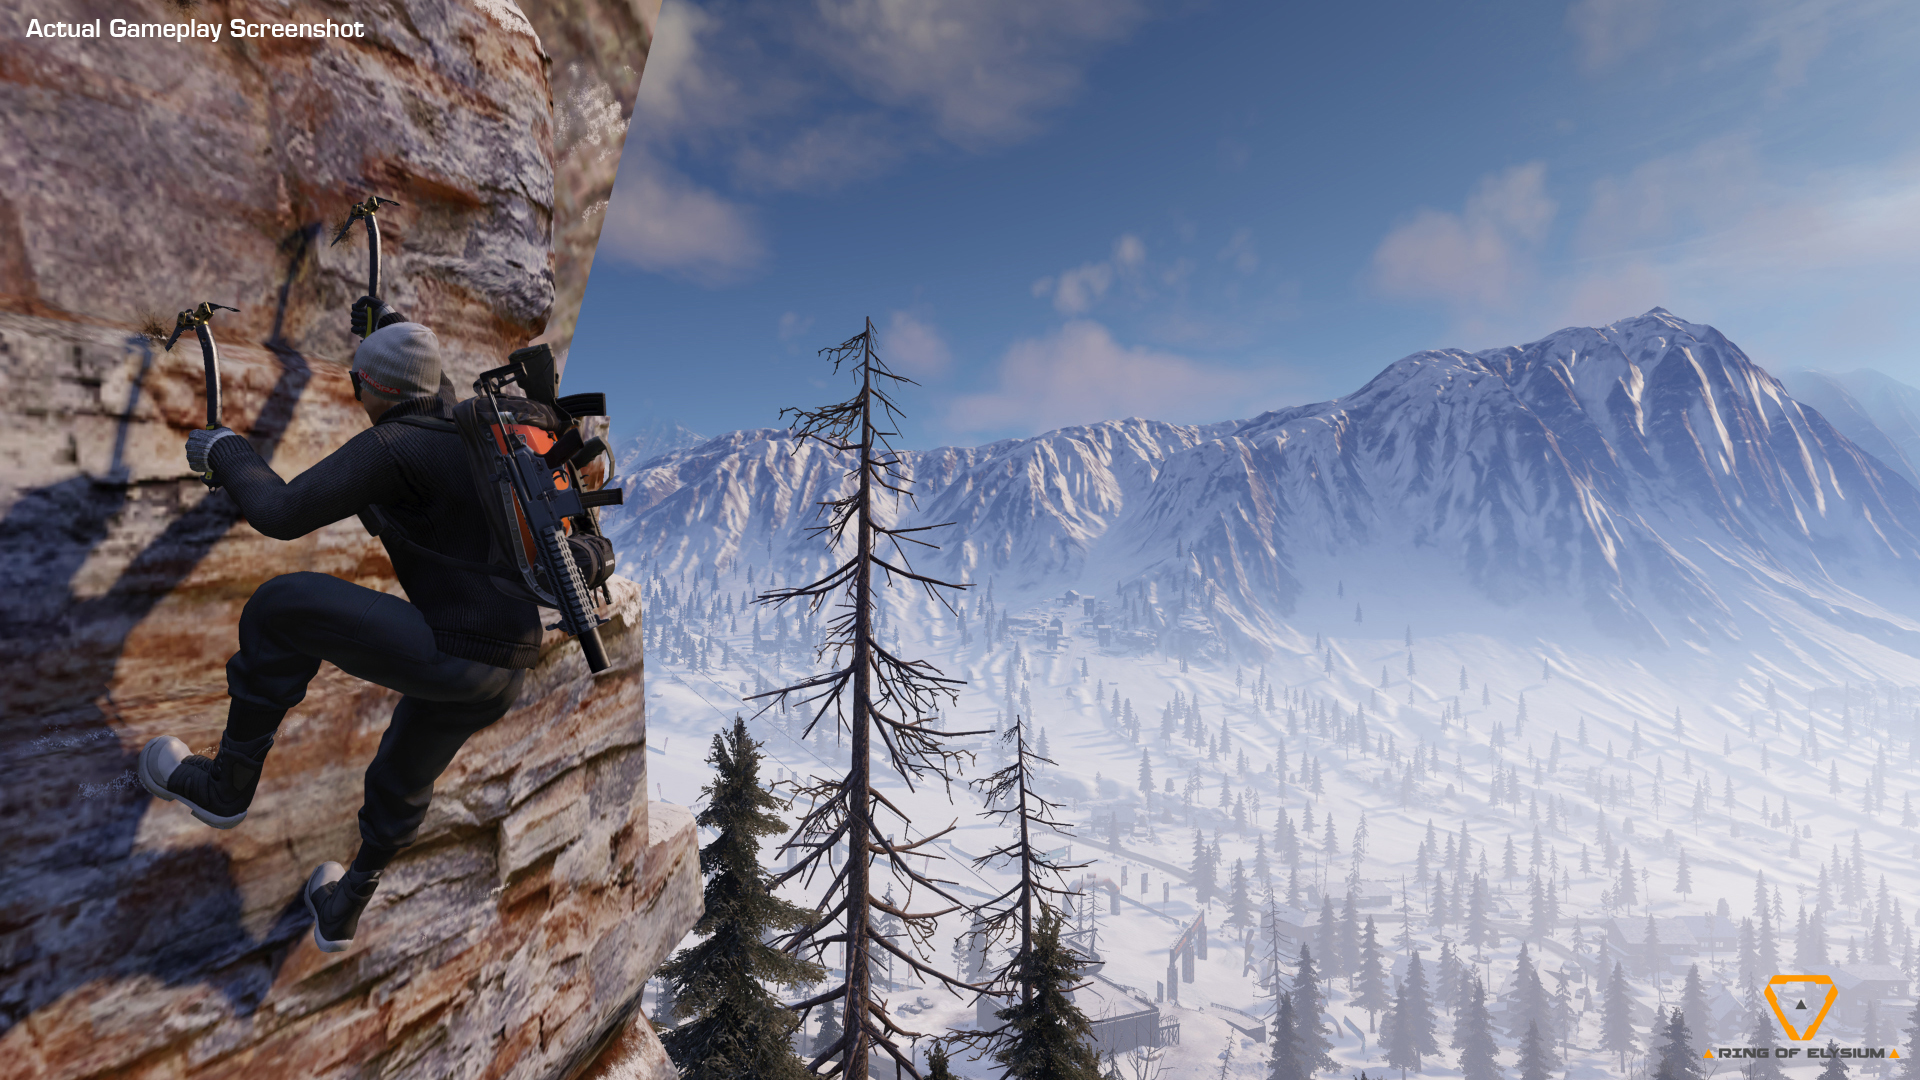 ring of elysium download size pc